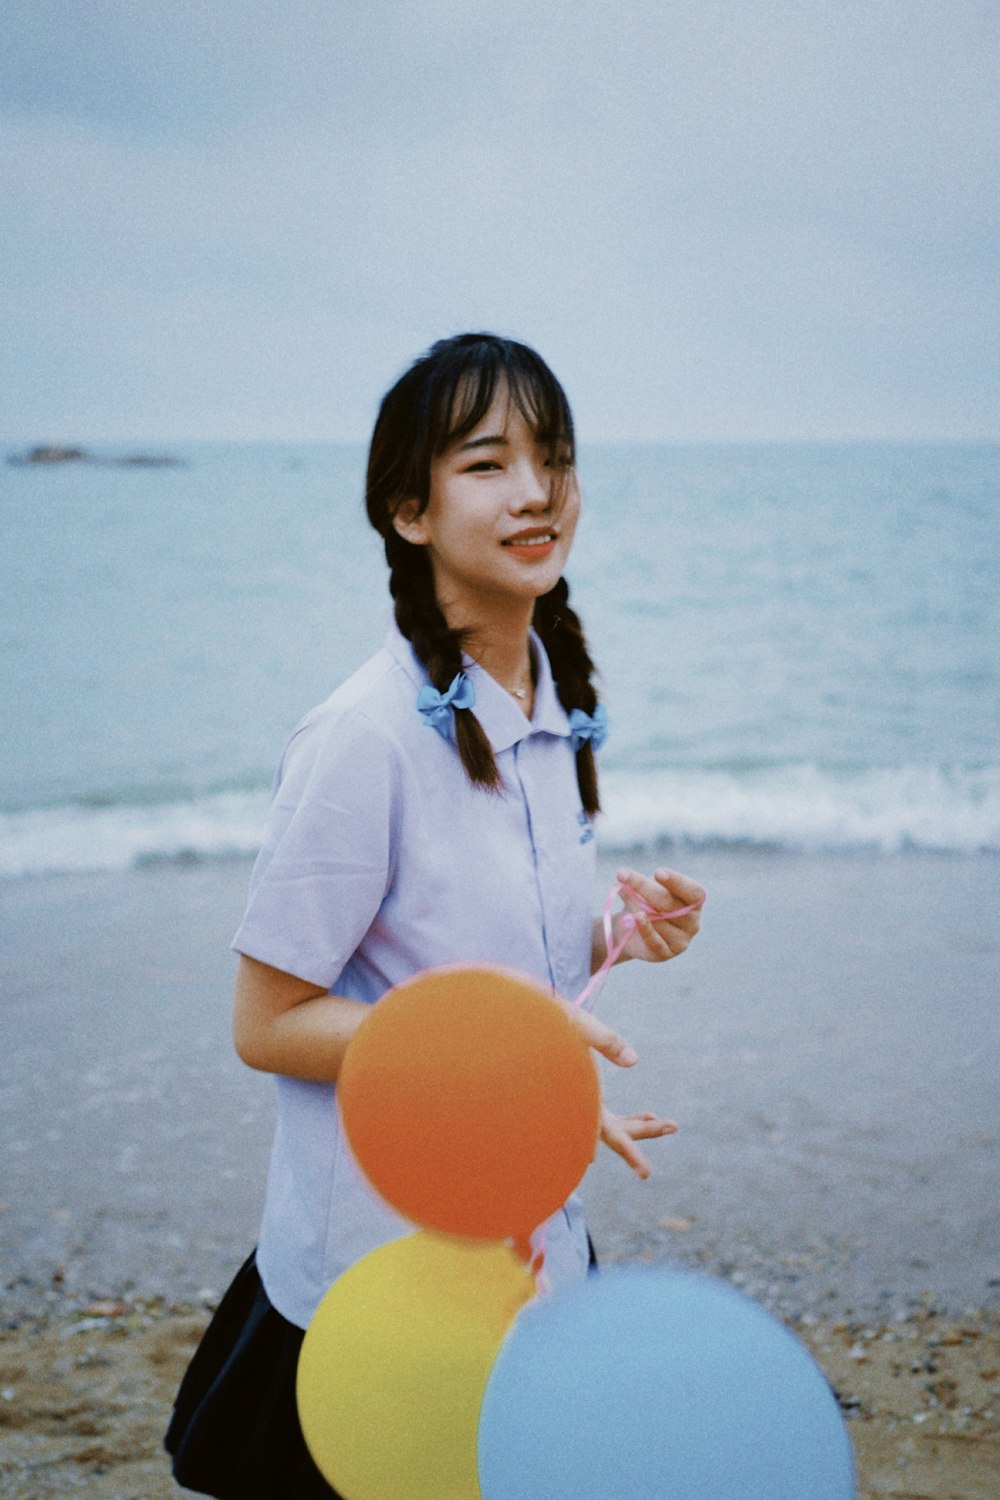 woman in white button up shirt holding orange round ball